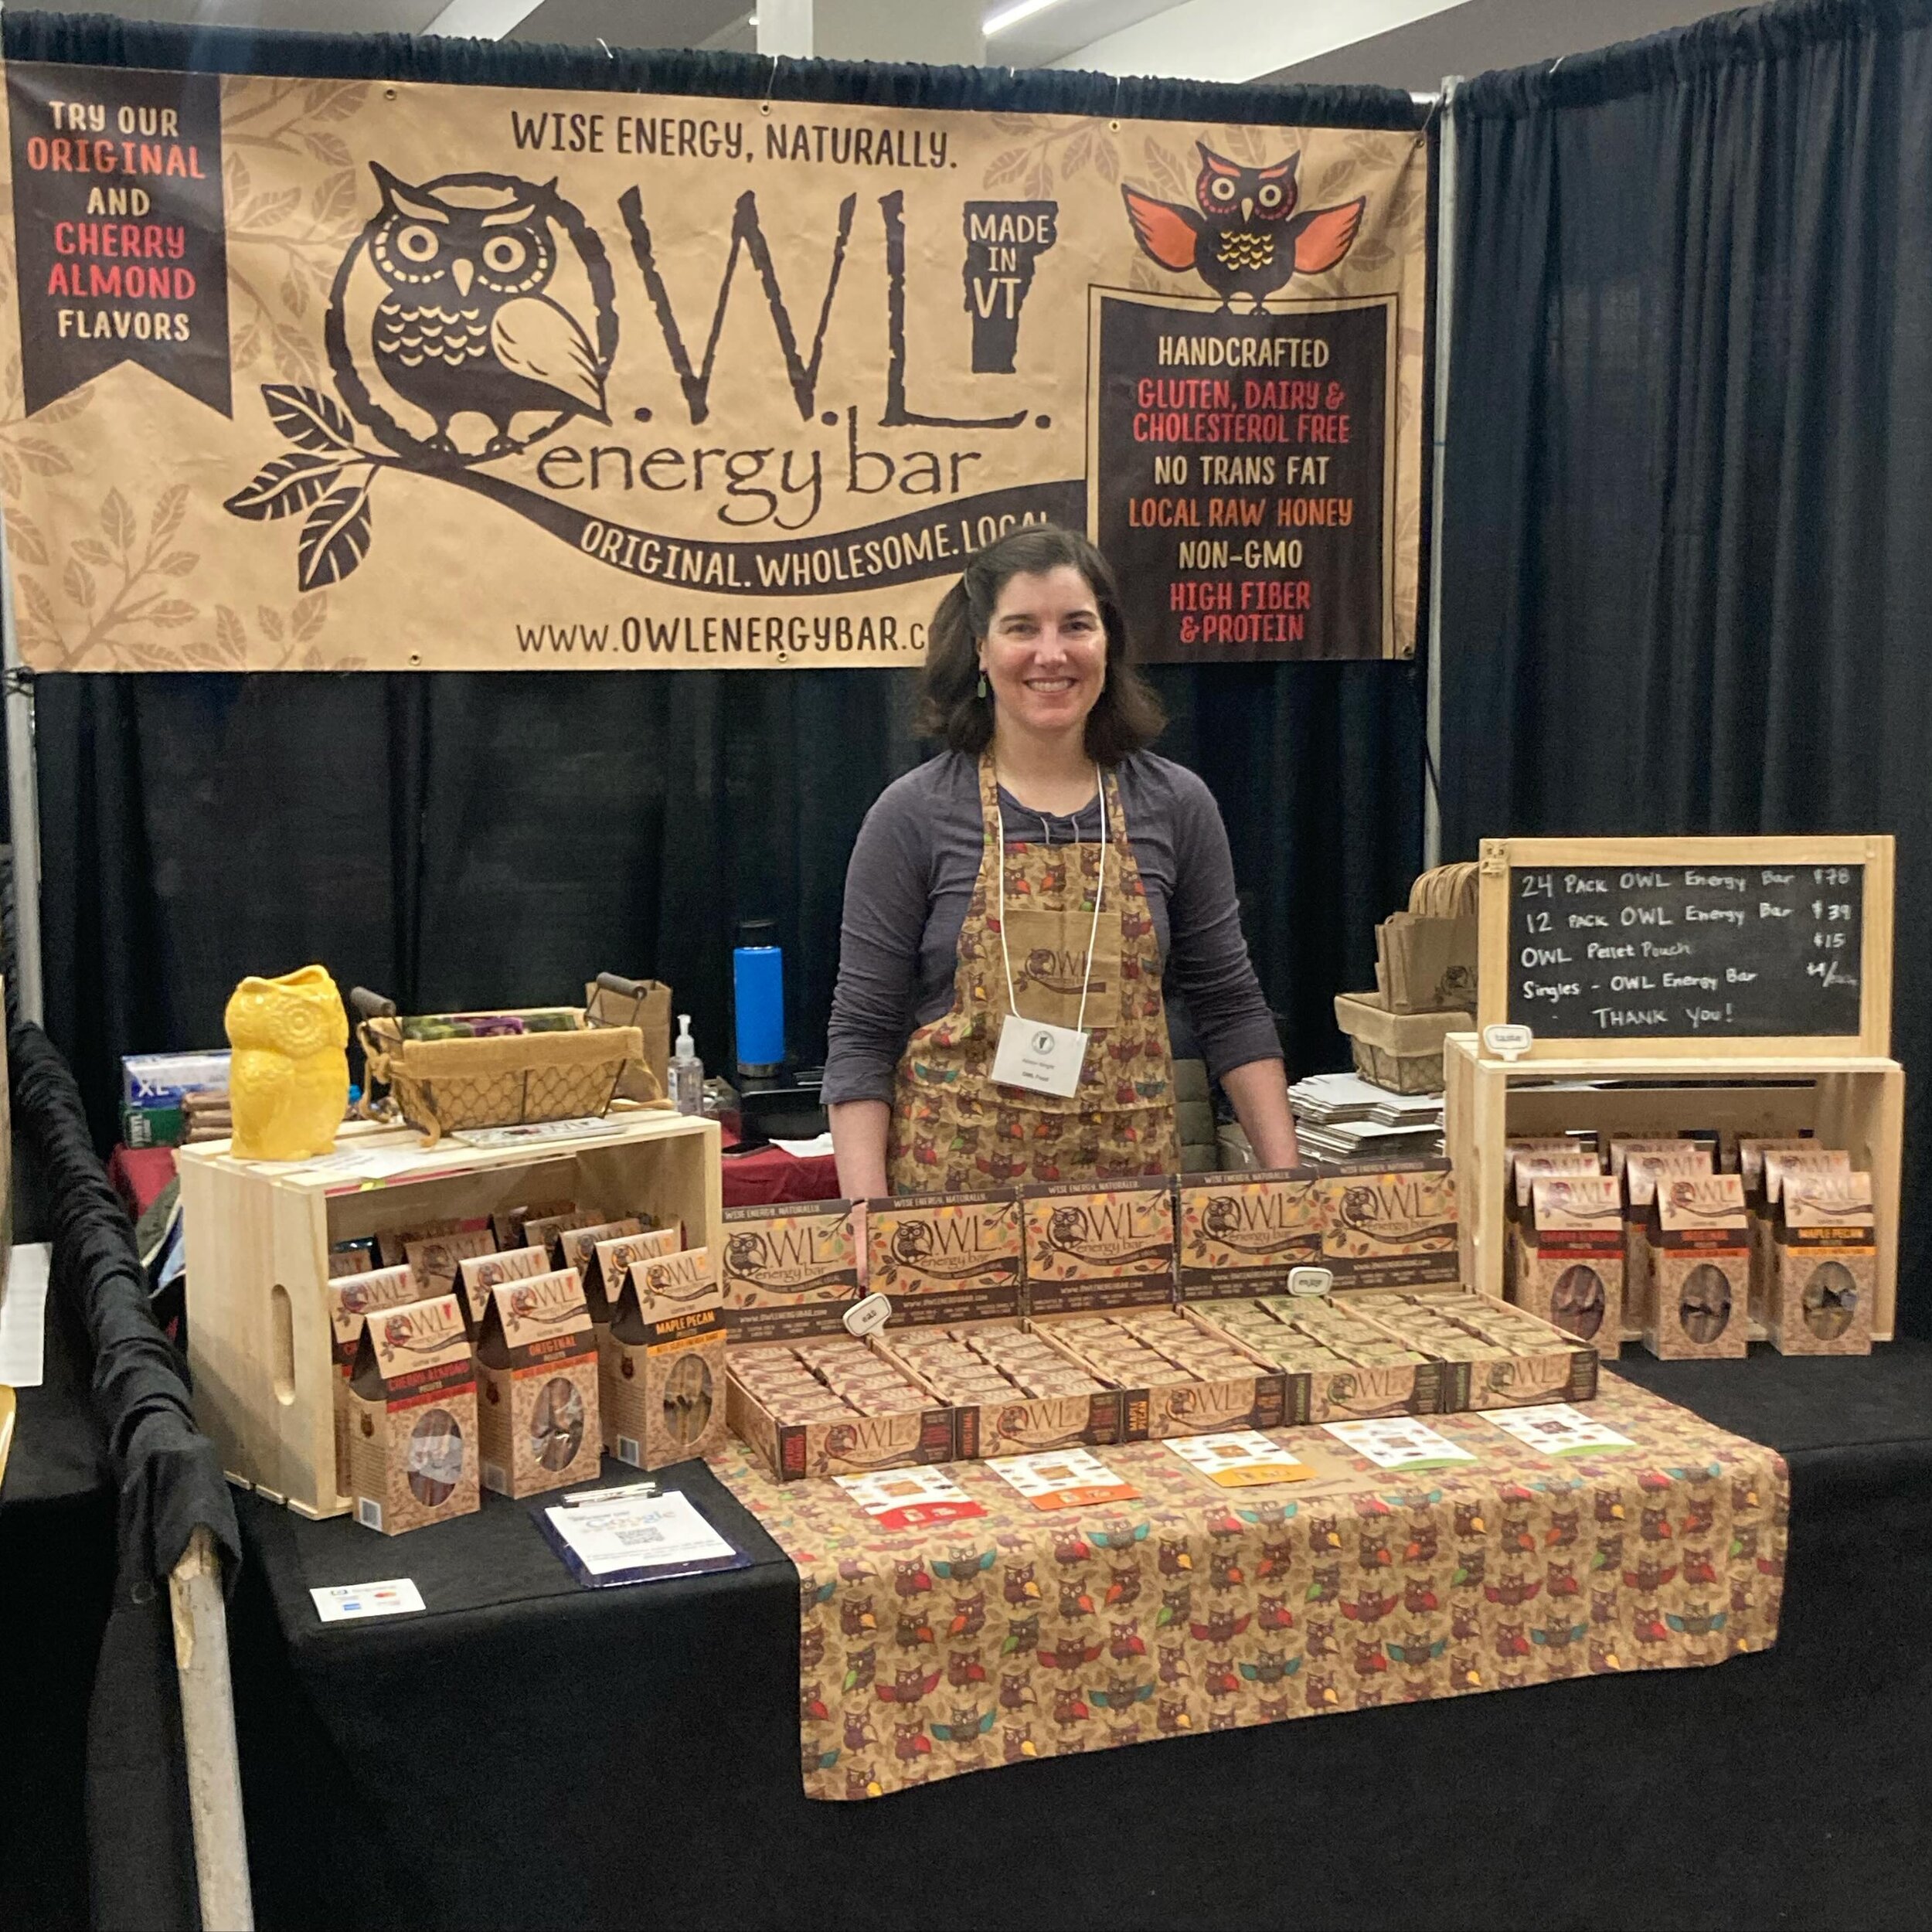 Alli and Seth are set up in Burlington, Vermont for the Made in Vermont Marketplace this weekend. You can find us at the DoubleTree Inn Hilton 870 Williston Rd, South Burlington, VT.  We will be here 9-5 today (Saturday) and 10-4 tomorrow (Sunday). C